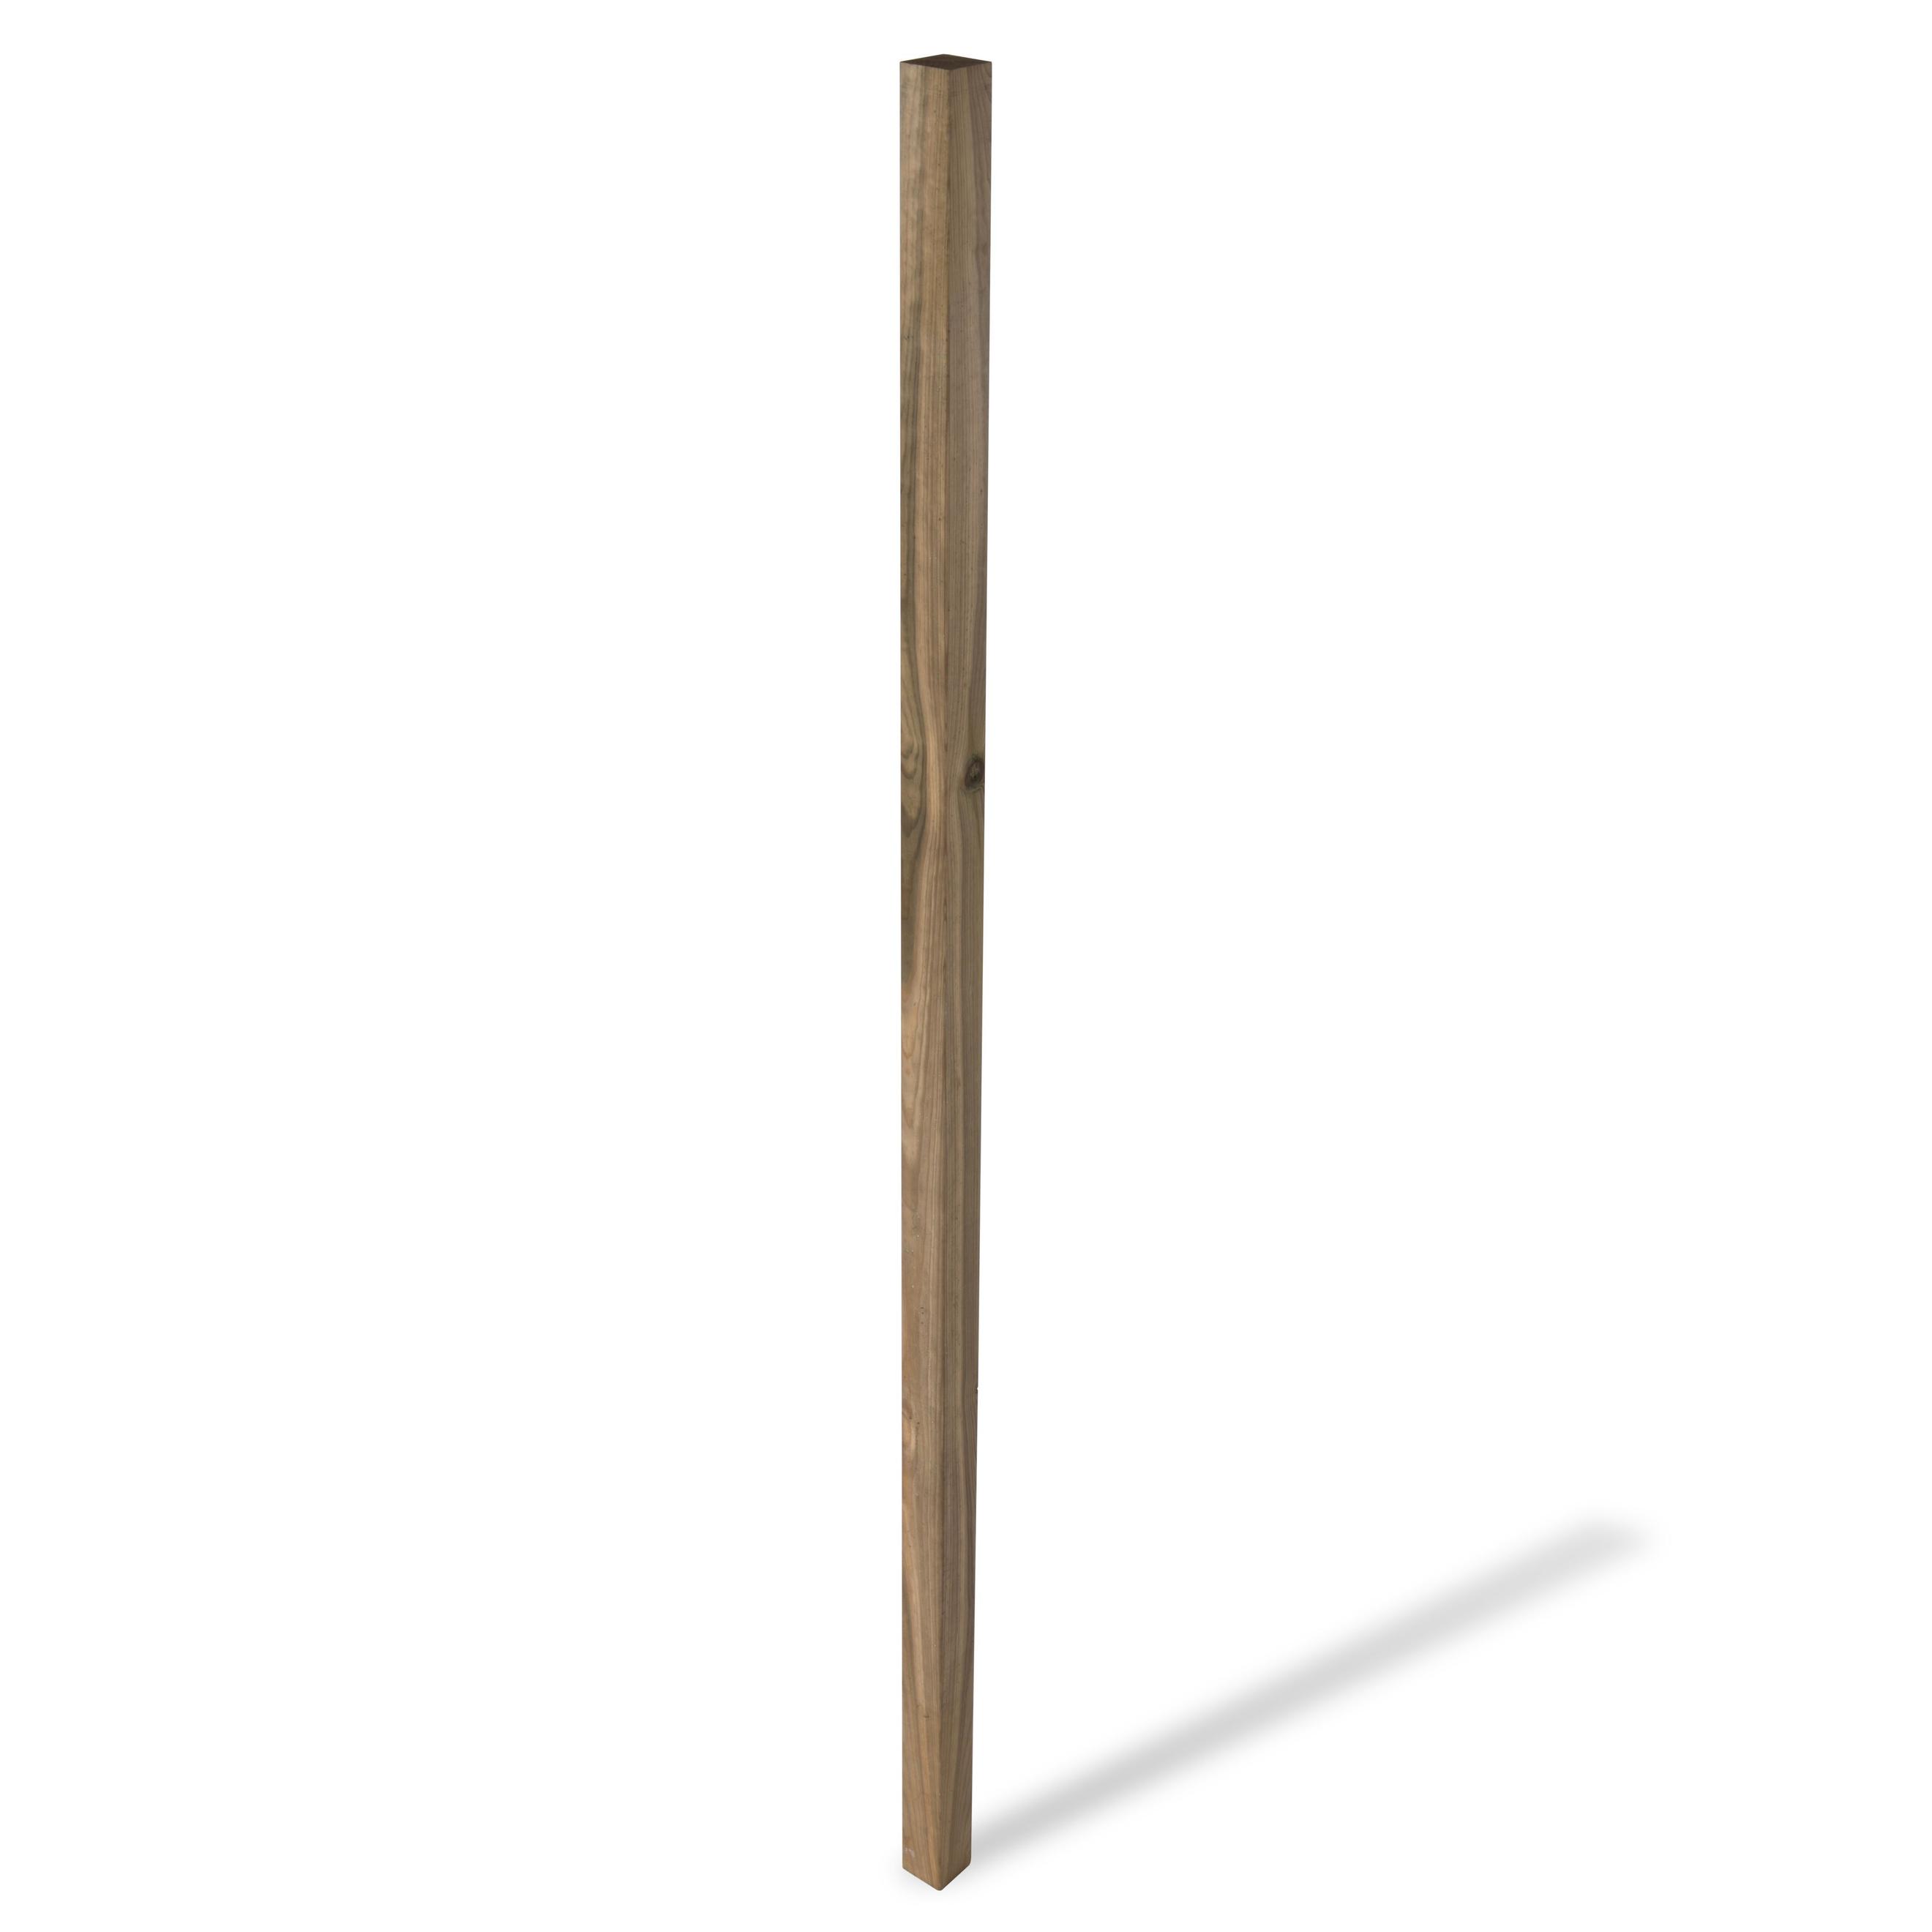 Klikstrom UC4 Natural Wooden Fence post (H)1.8m (W)70mm offers at £13 in B&Q